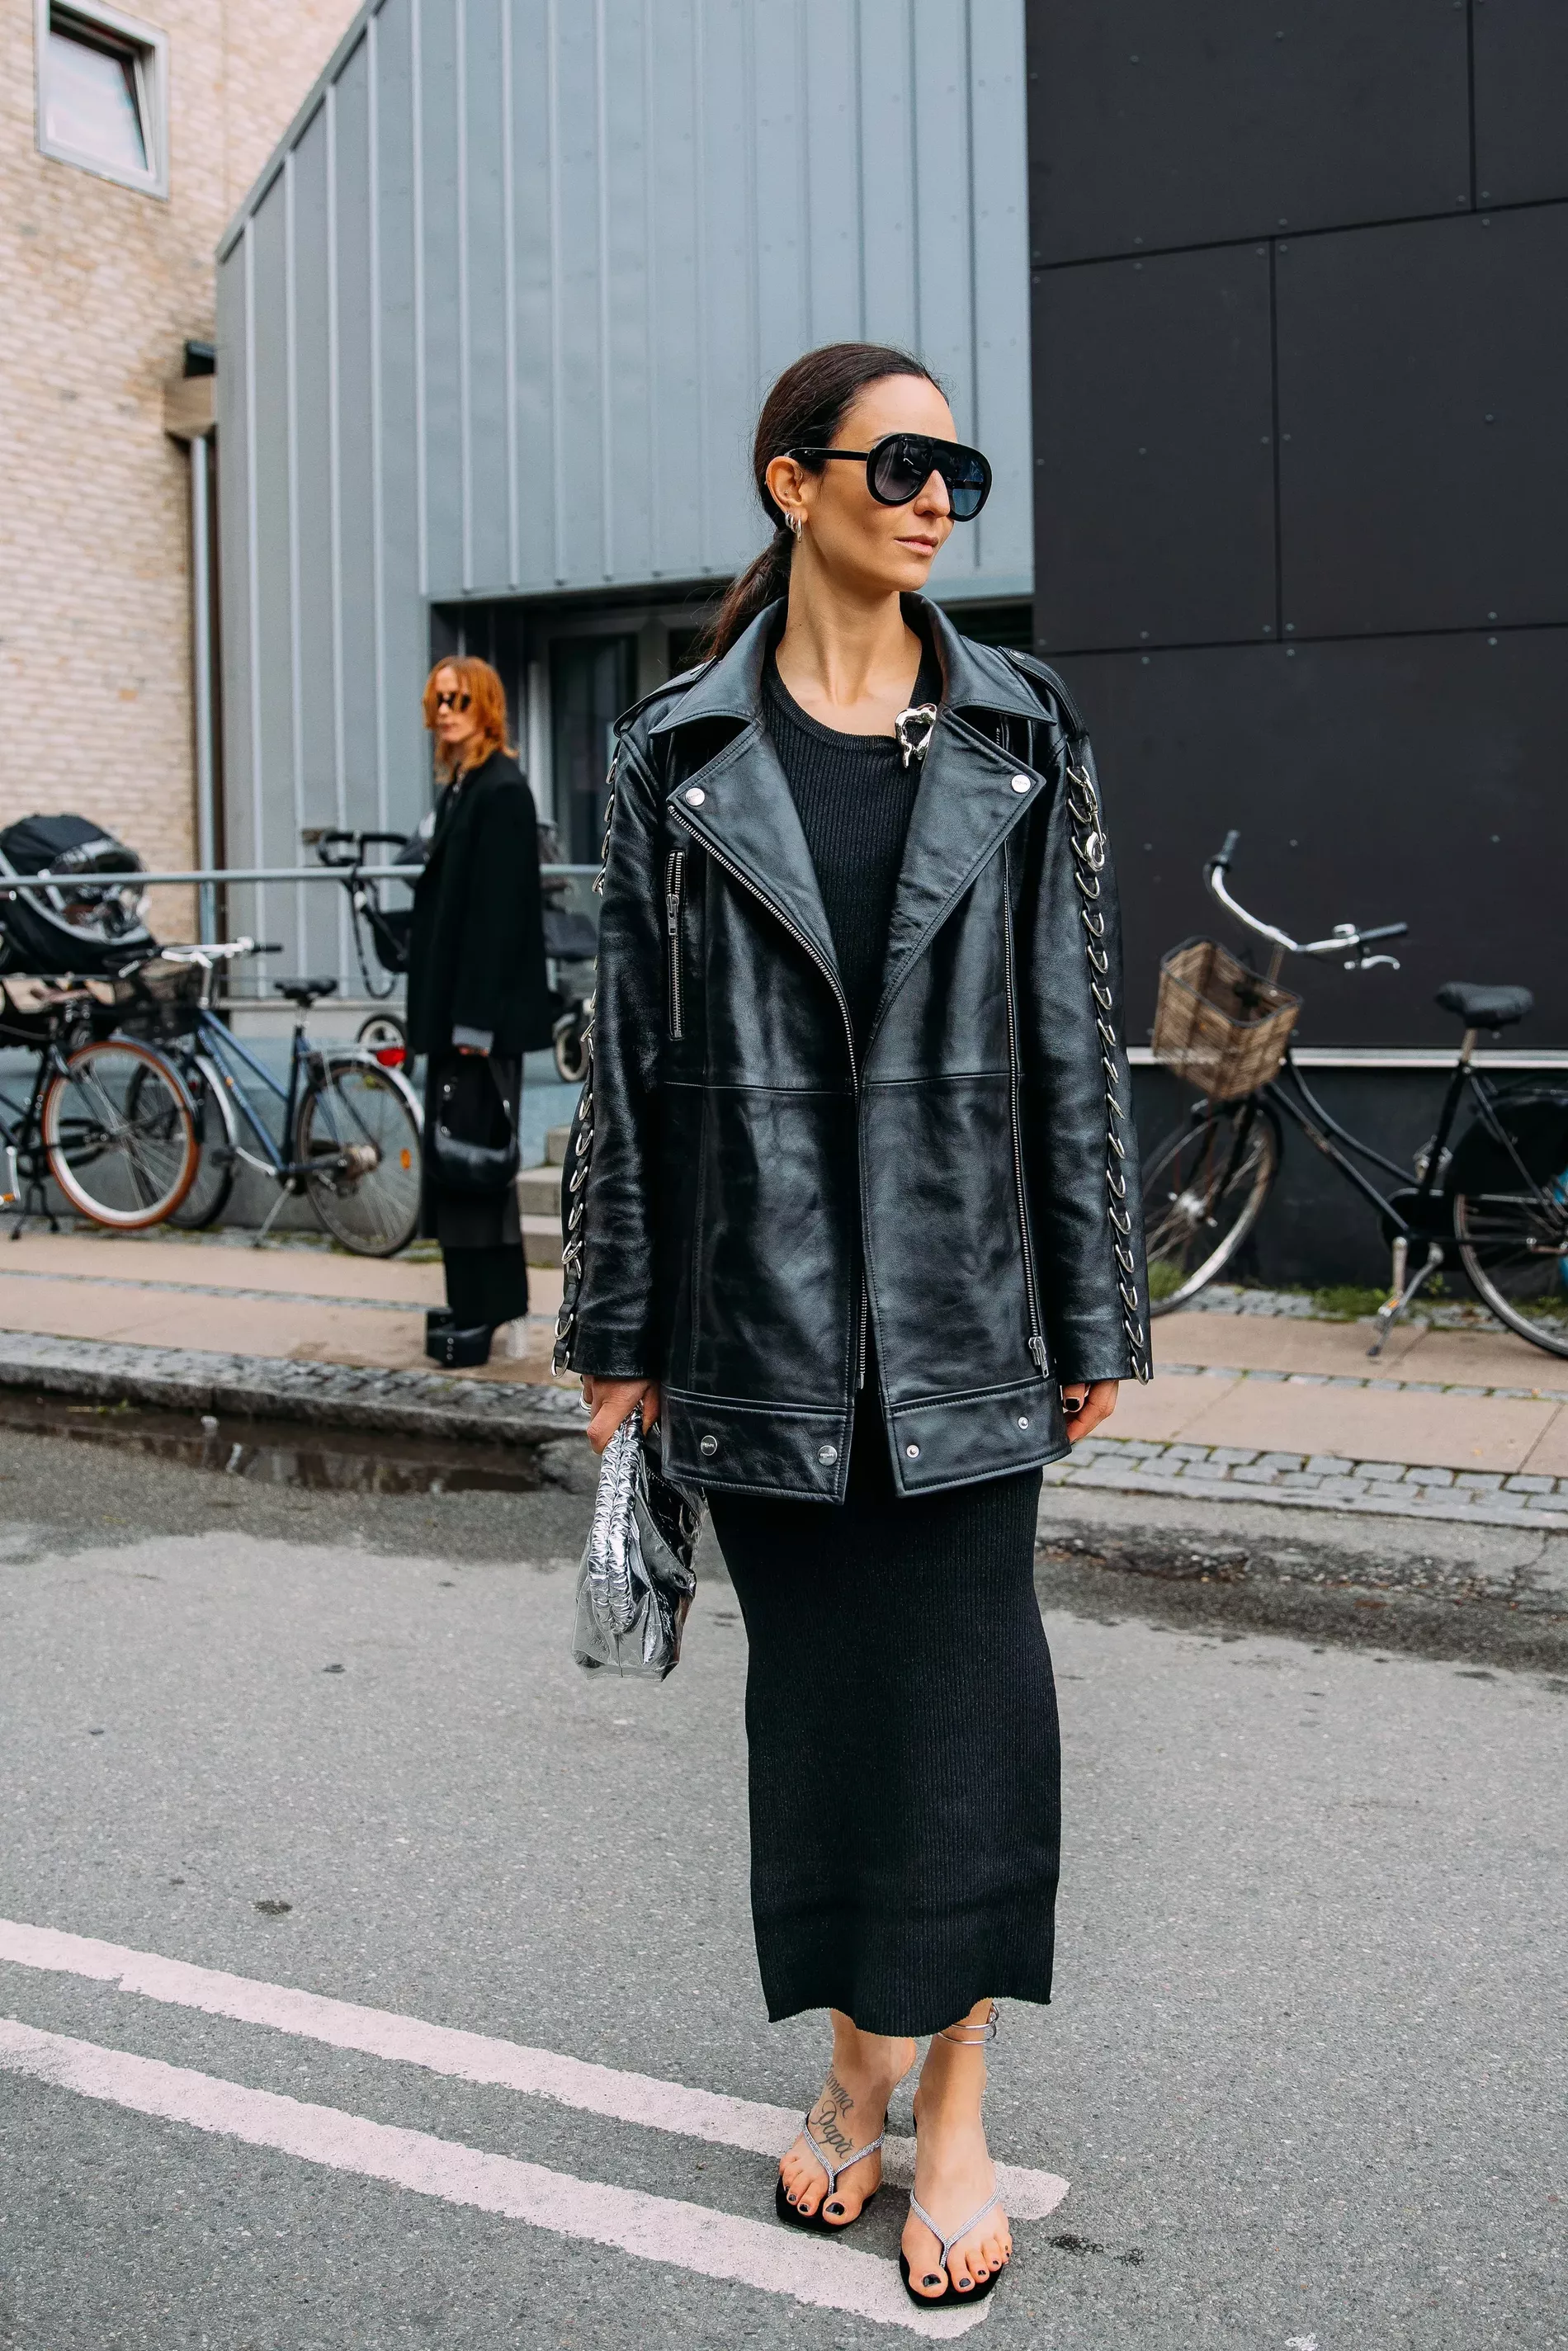 5 street style trends to try from Copenhagen Fashion Week - Vogue ...